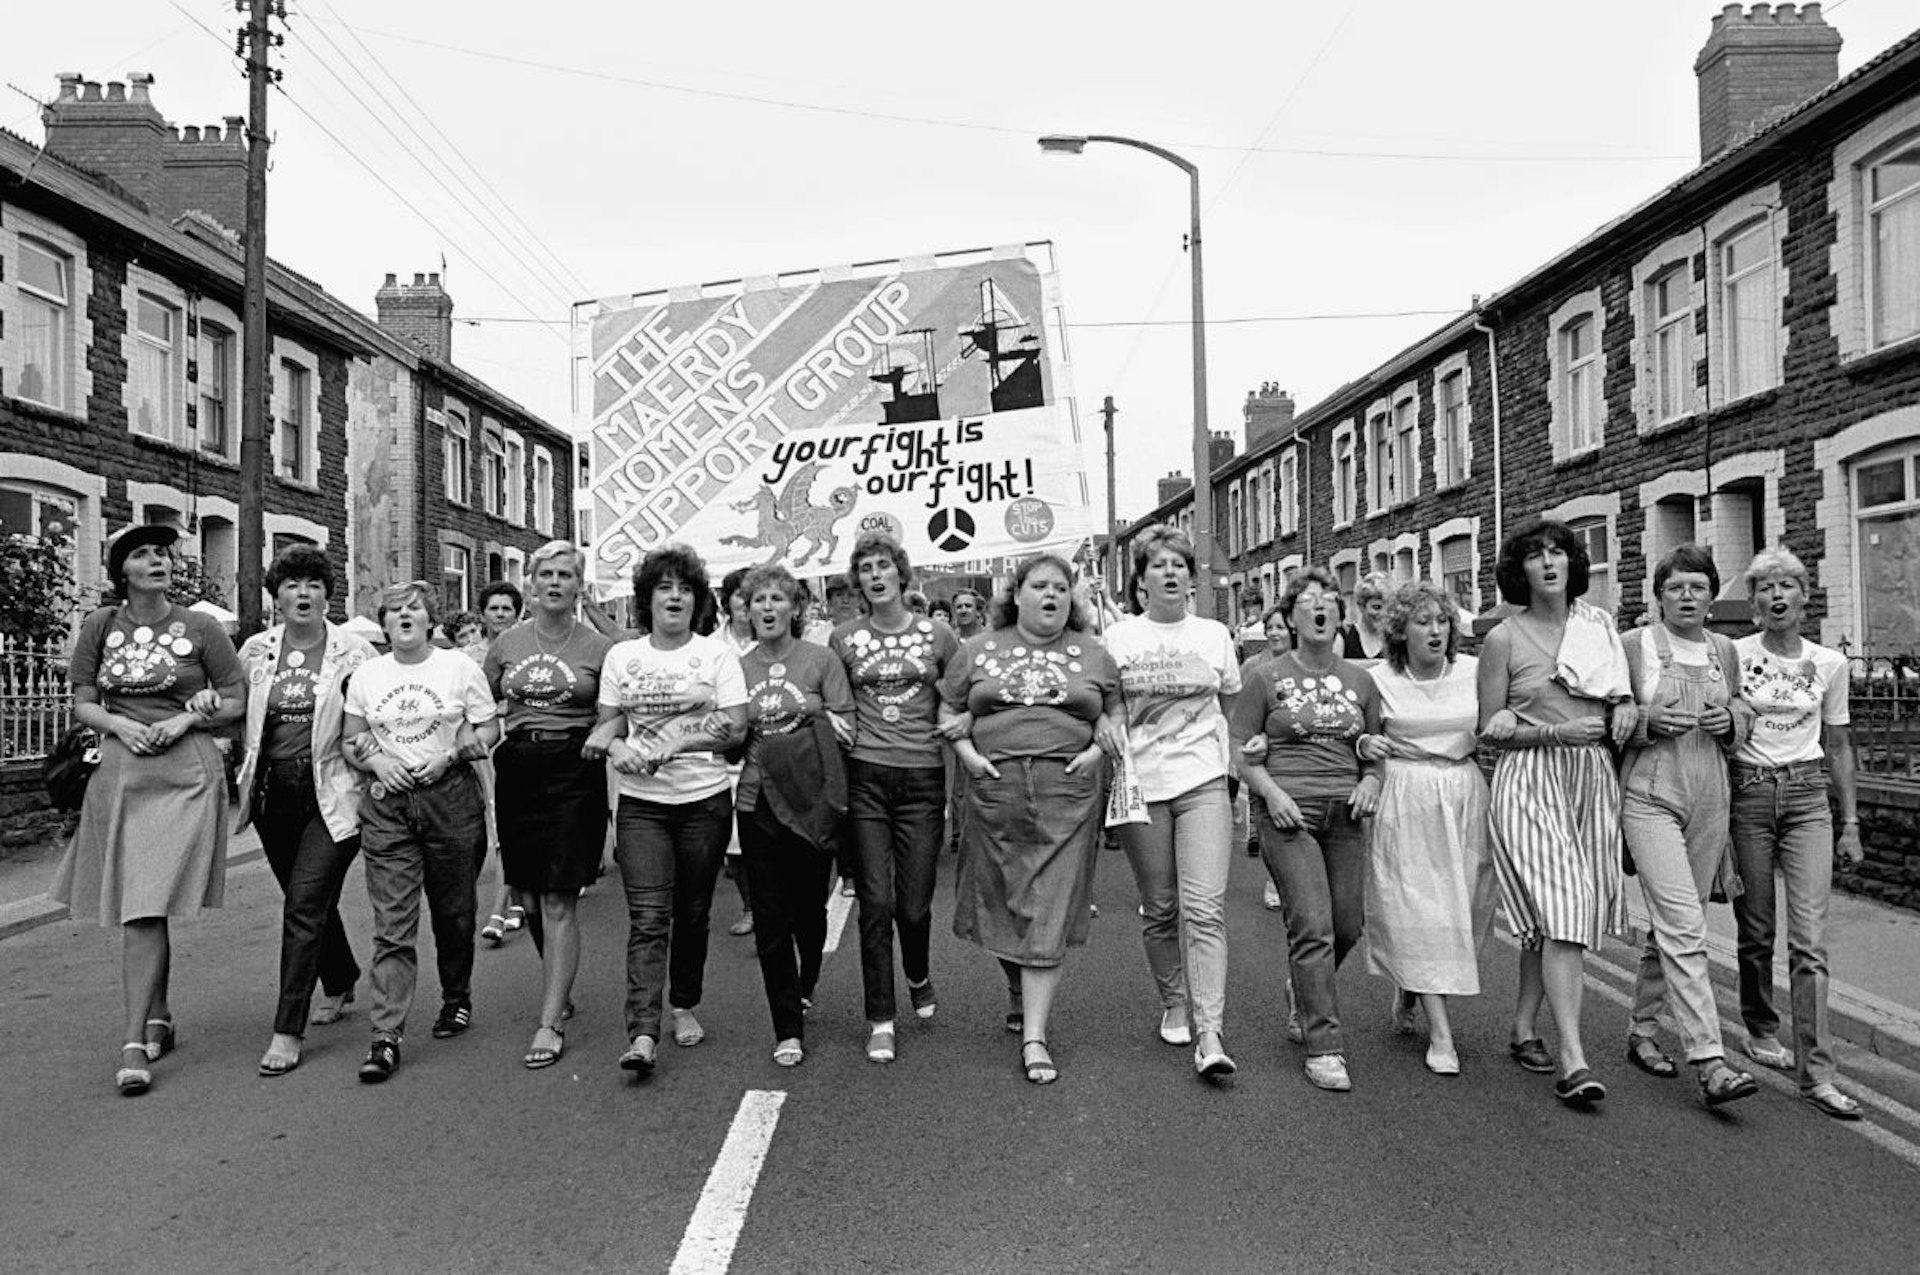 A year on the frontlines of the UK miner’s strike